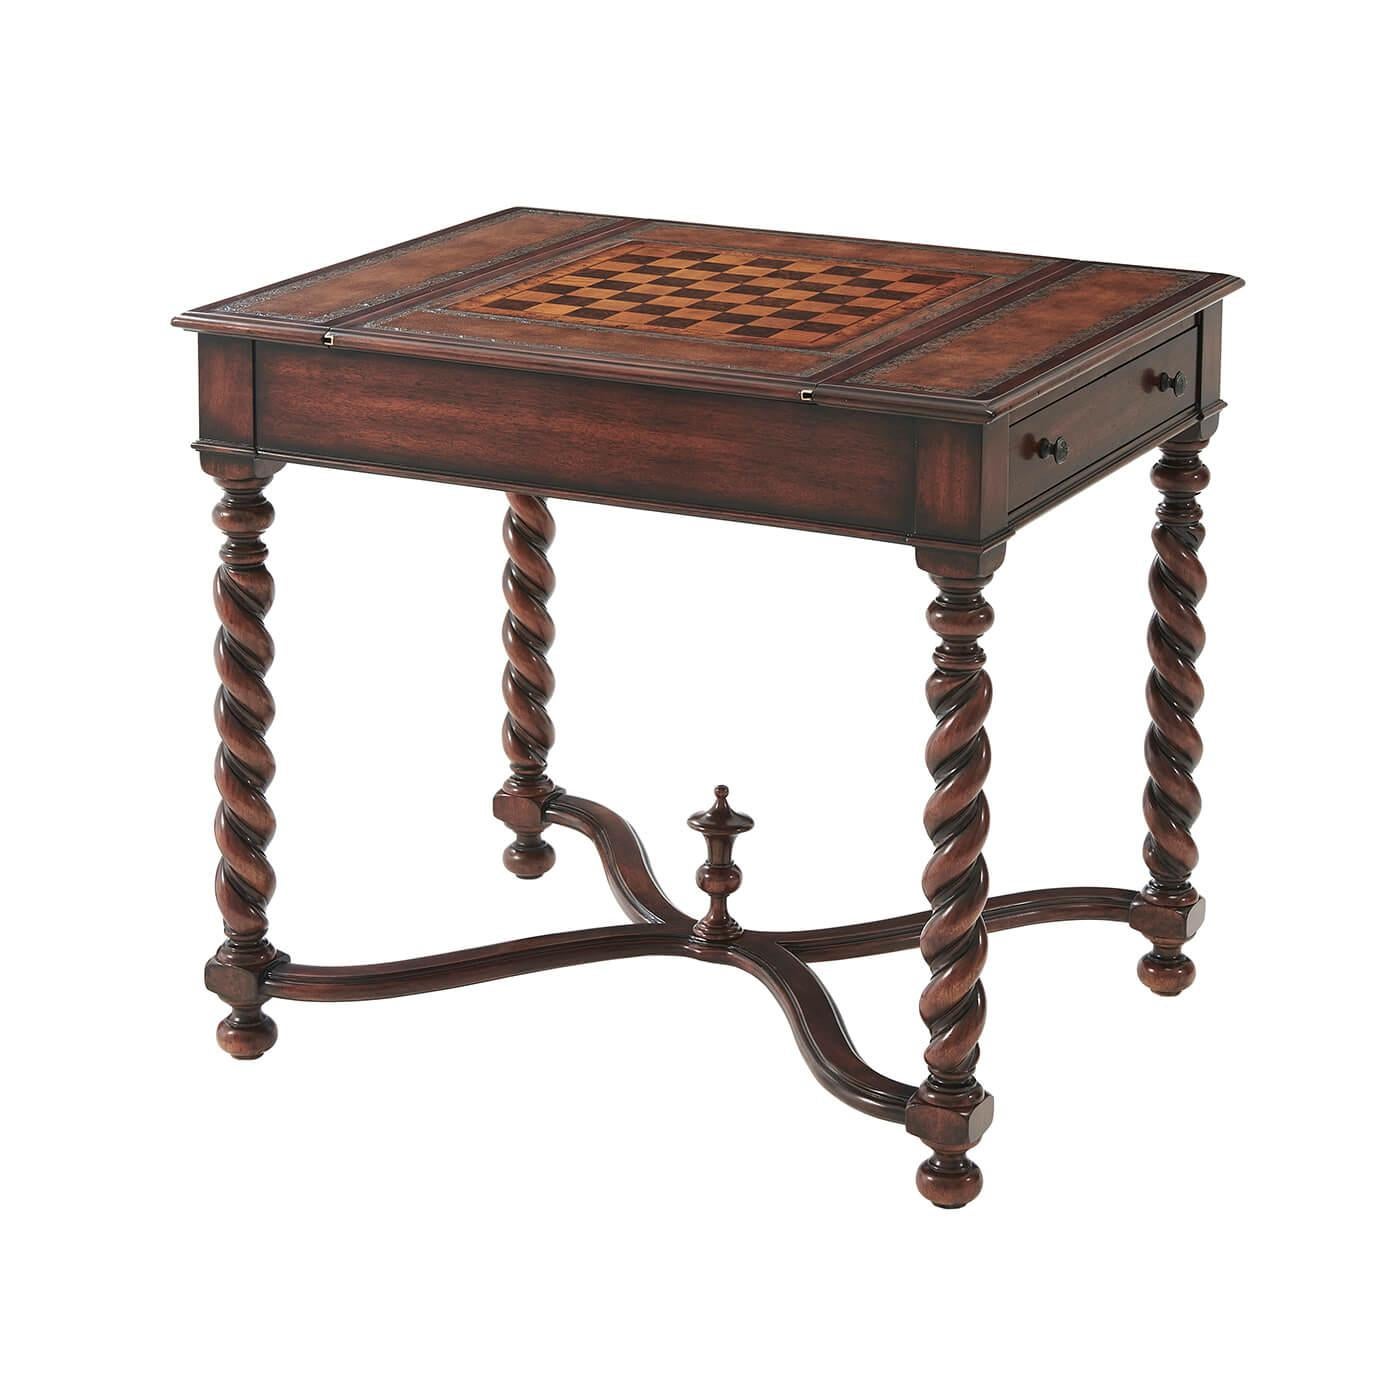 A hand-carved and inlaid games table, the reversible chess and hand-tooled leather inlaid top revealing a backgammon board below, the frieze with two opposing end drawers, on spiral turned barley twist legs joined by an 'X' stretcher. 

Dimensions: